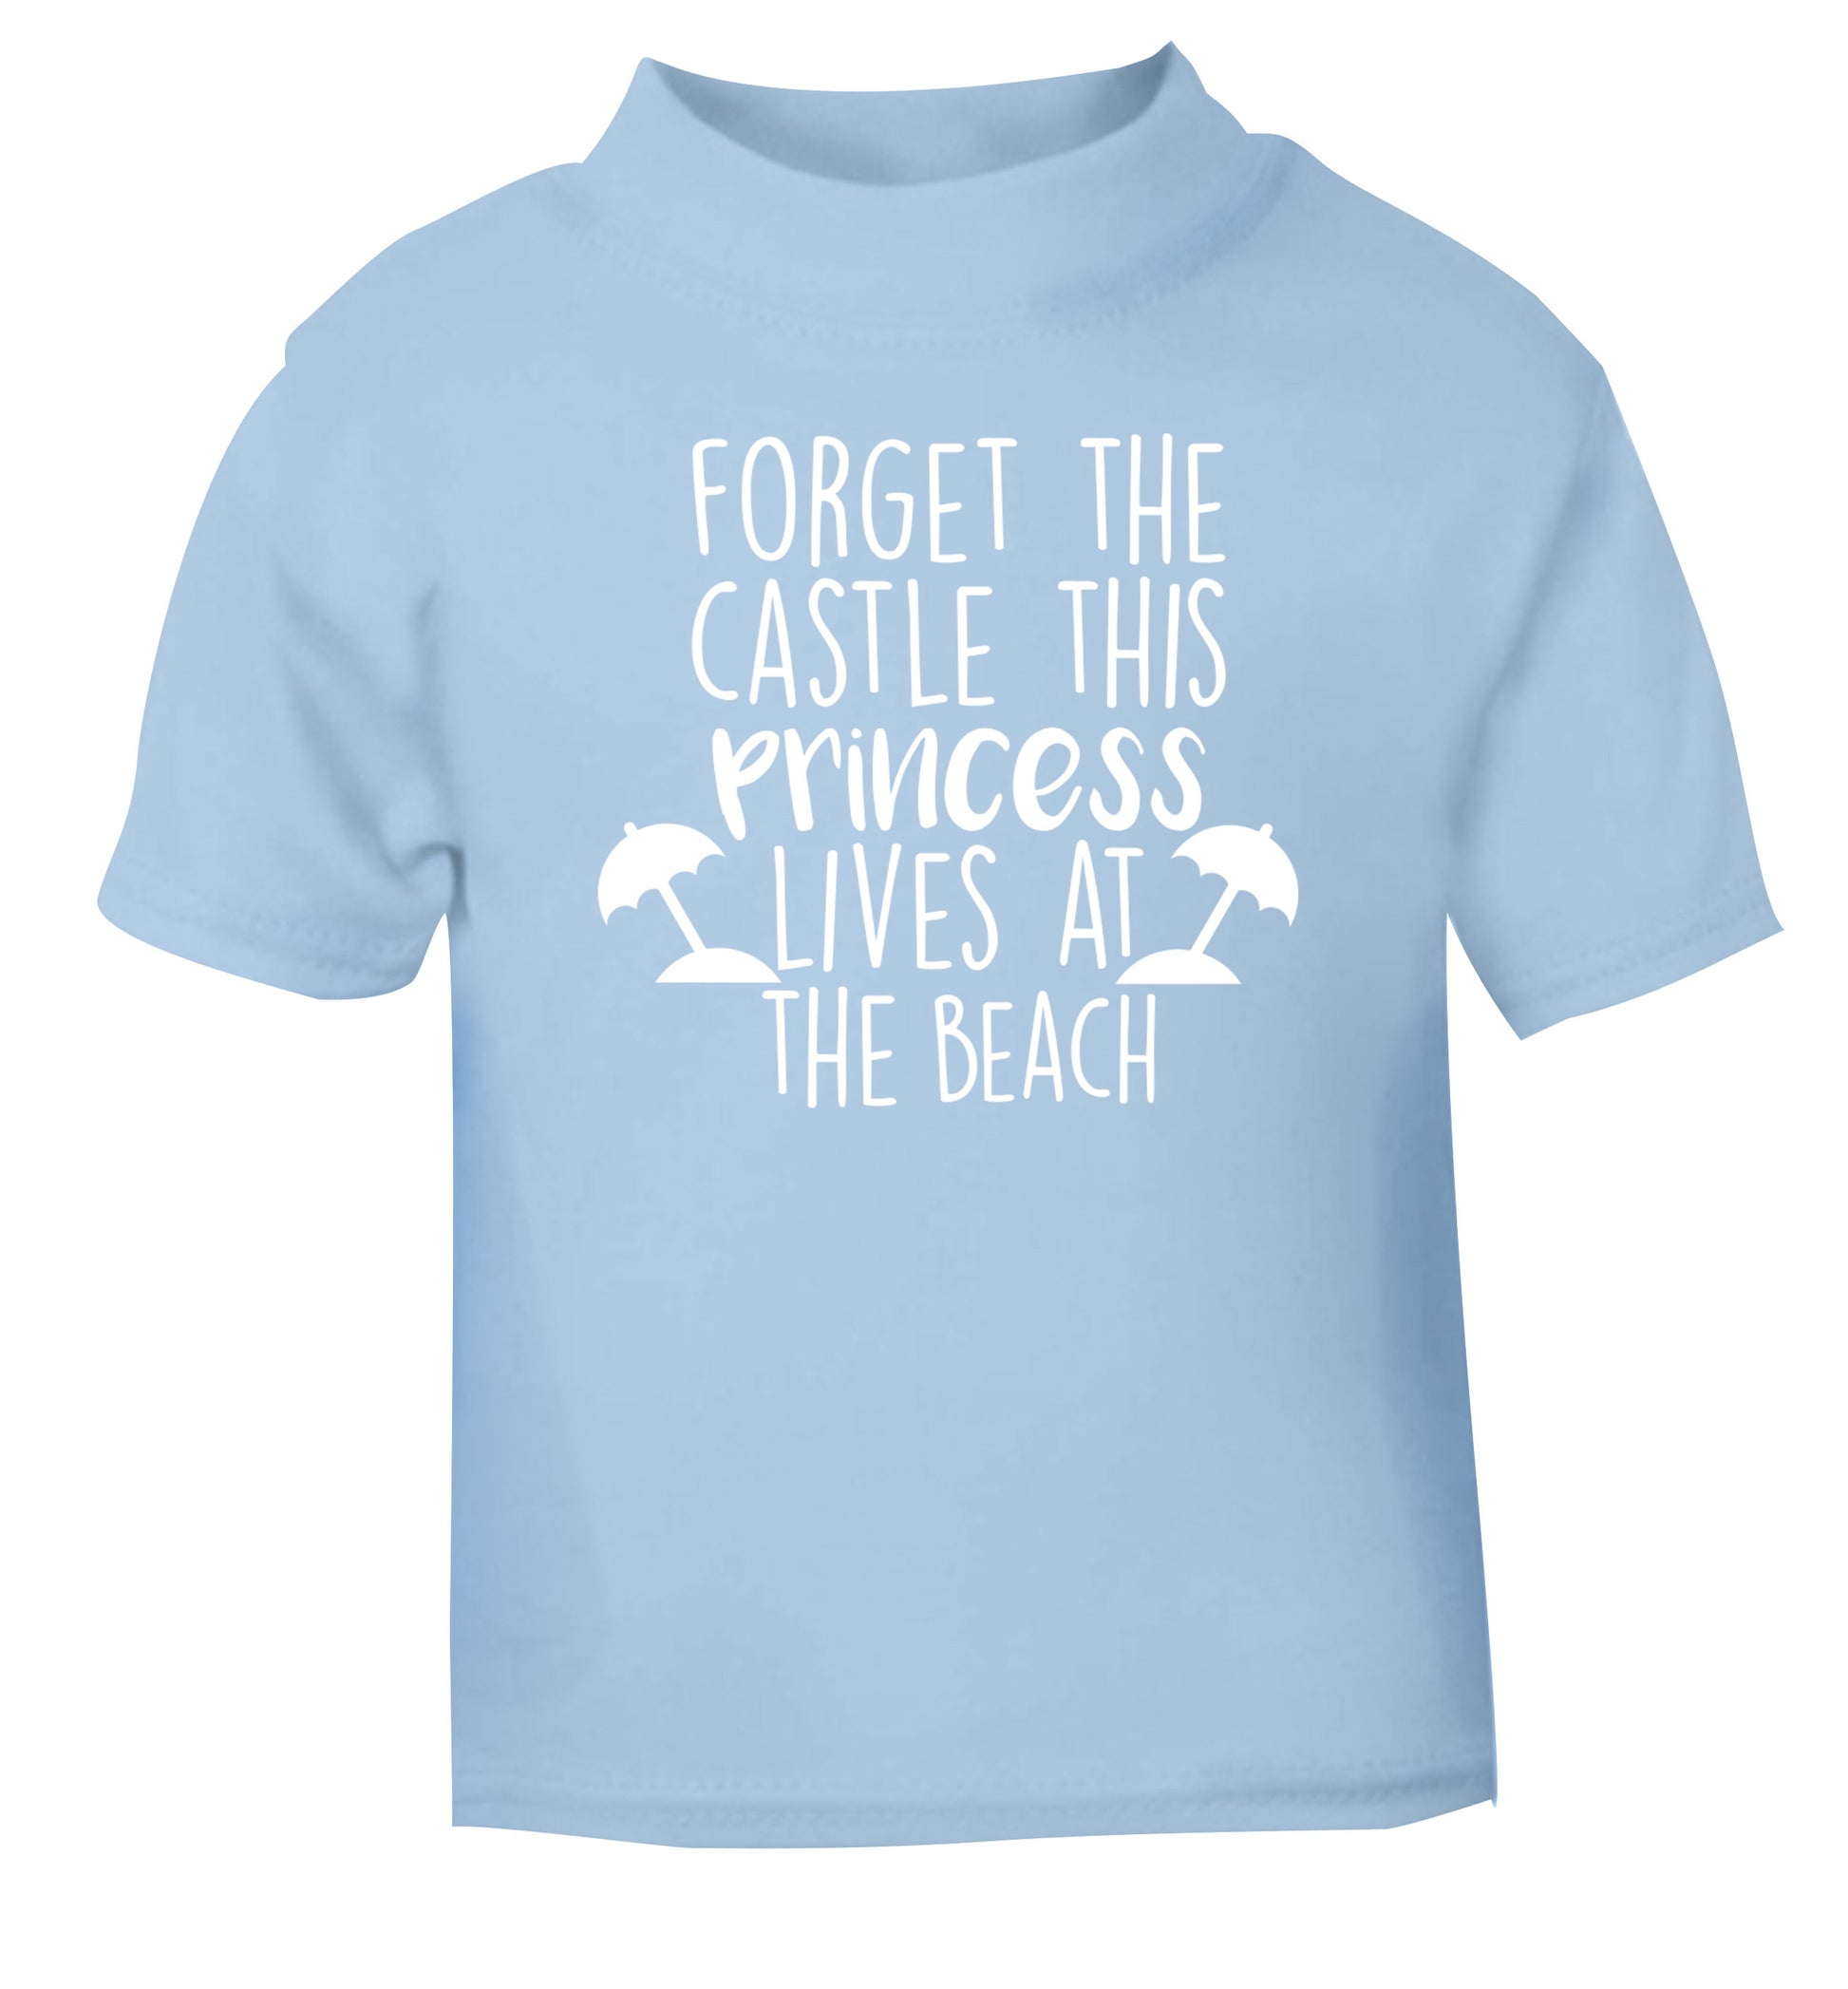 Forget the castle this princess lives at the beach light blue Baby Toddler Tshirt 2 Years